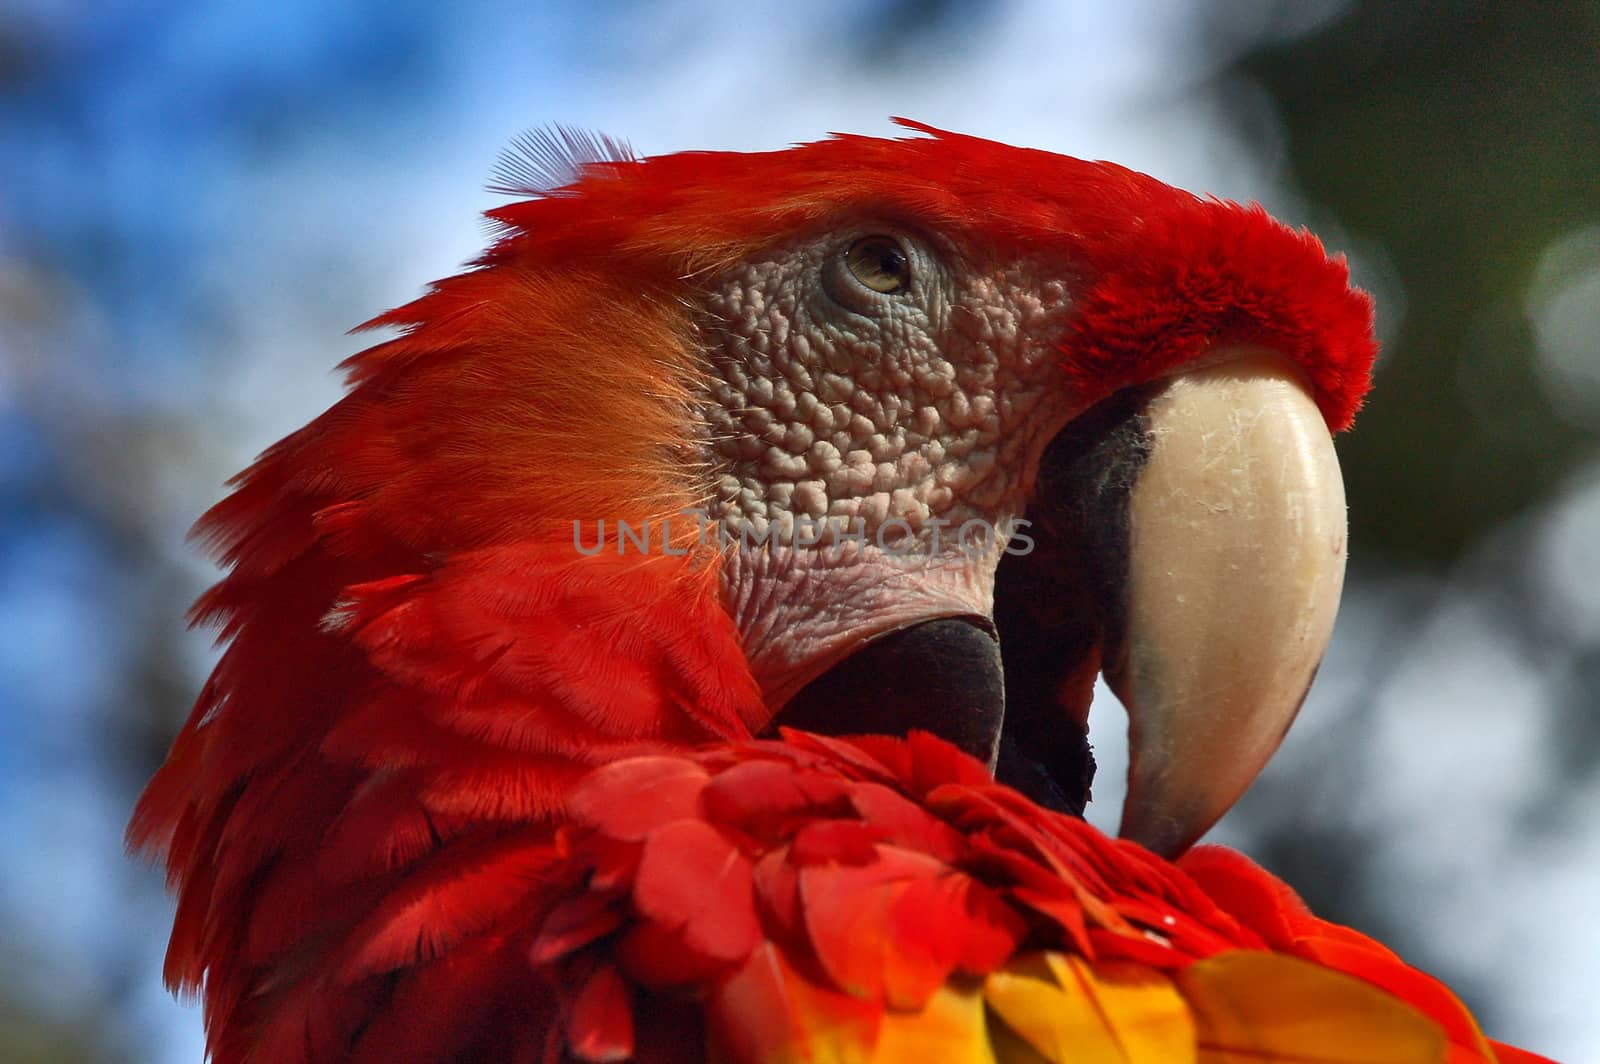  Head of Red Parrot by underworld